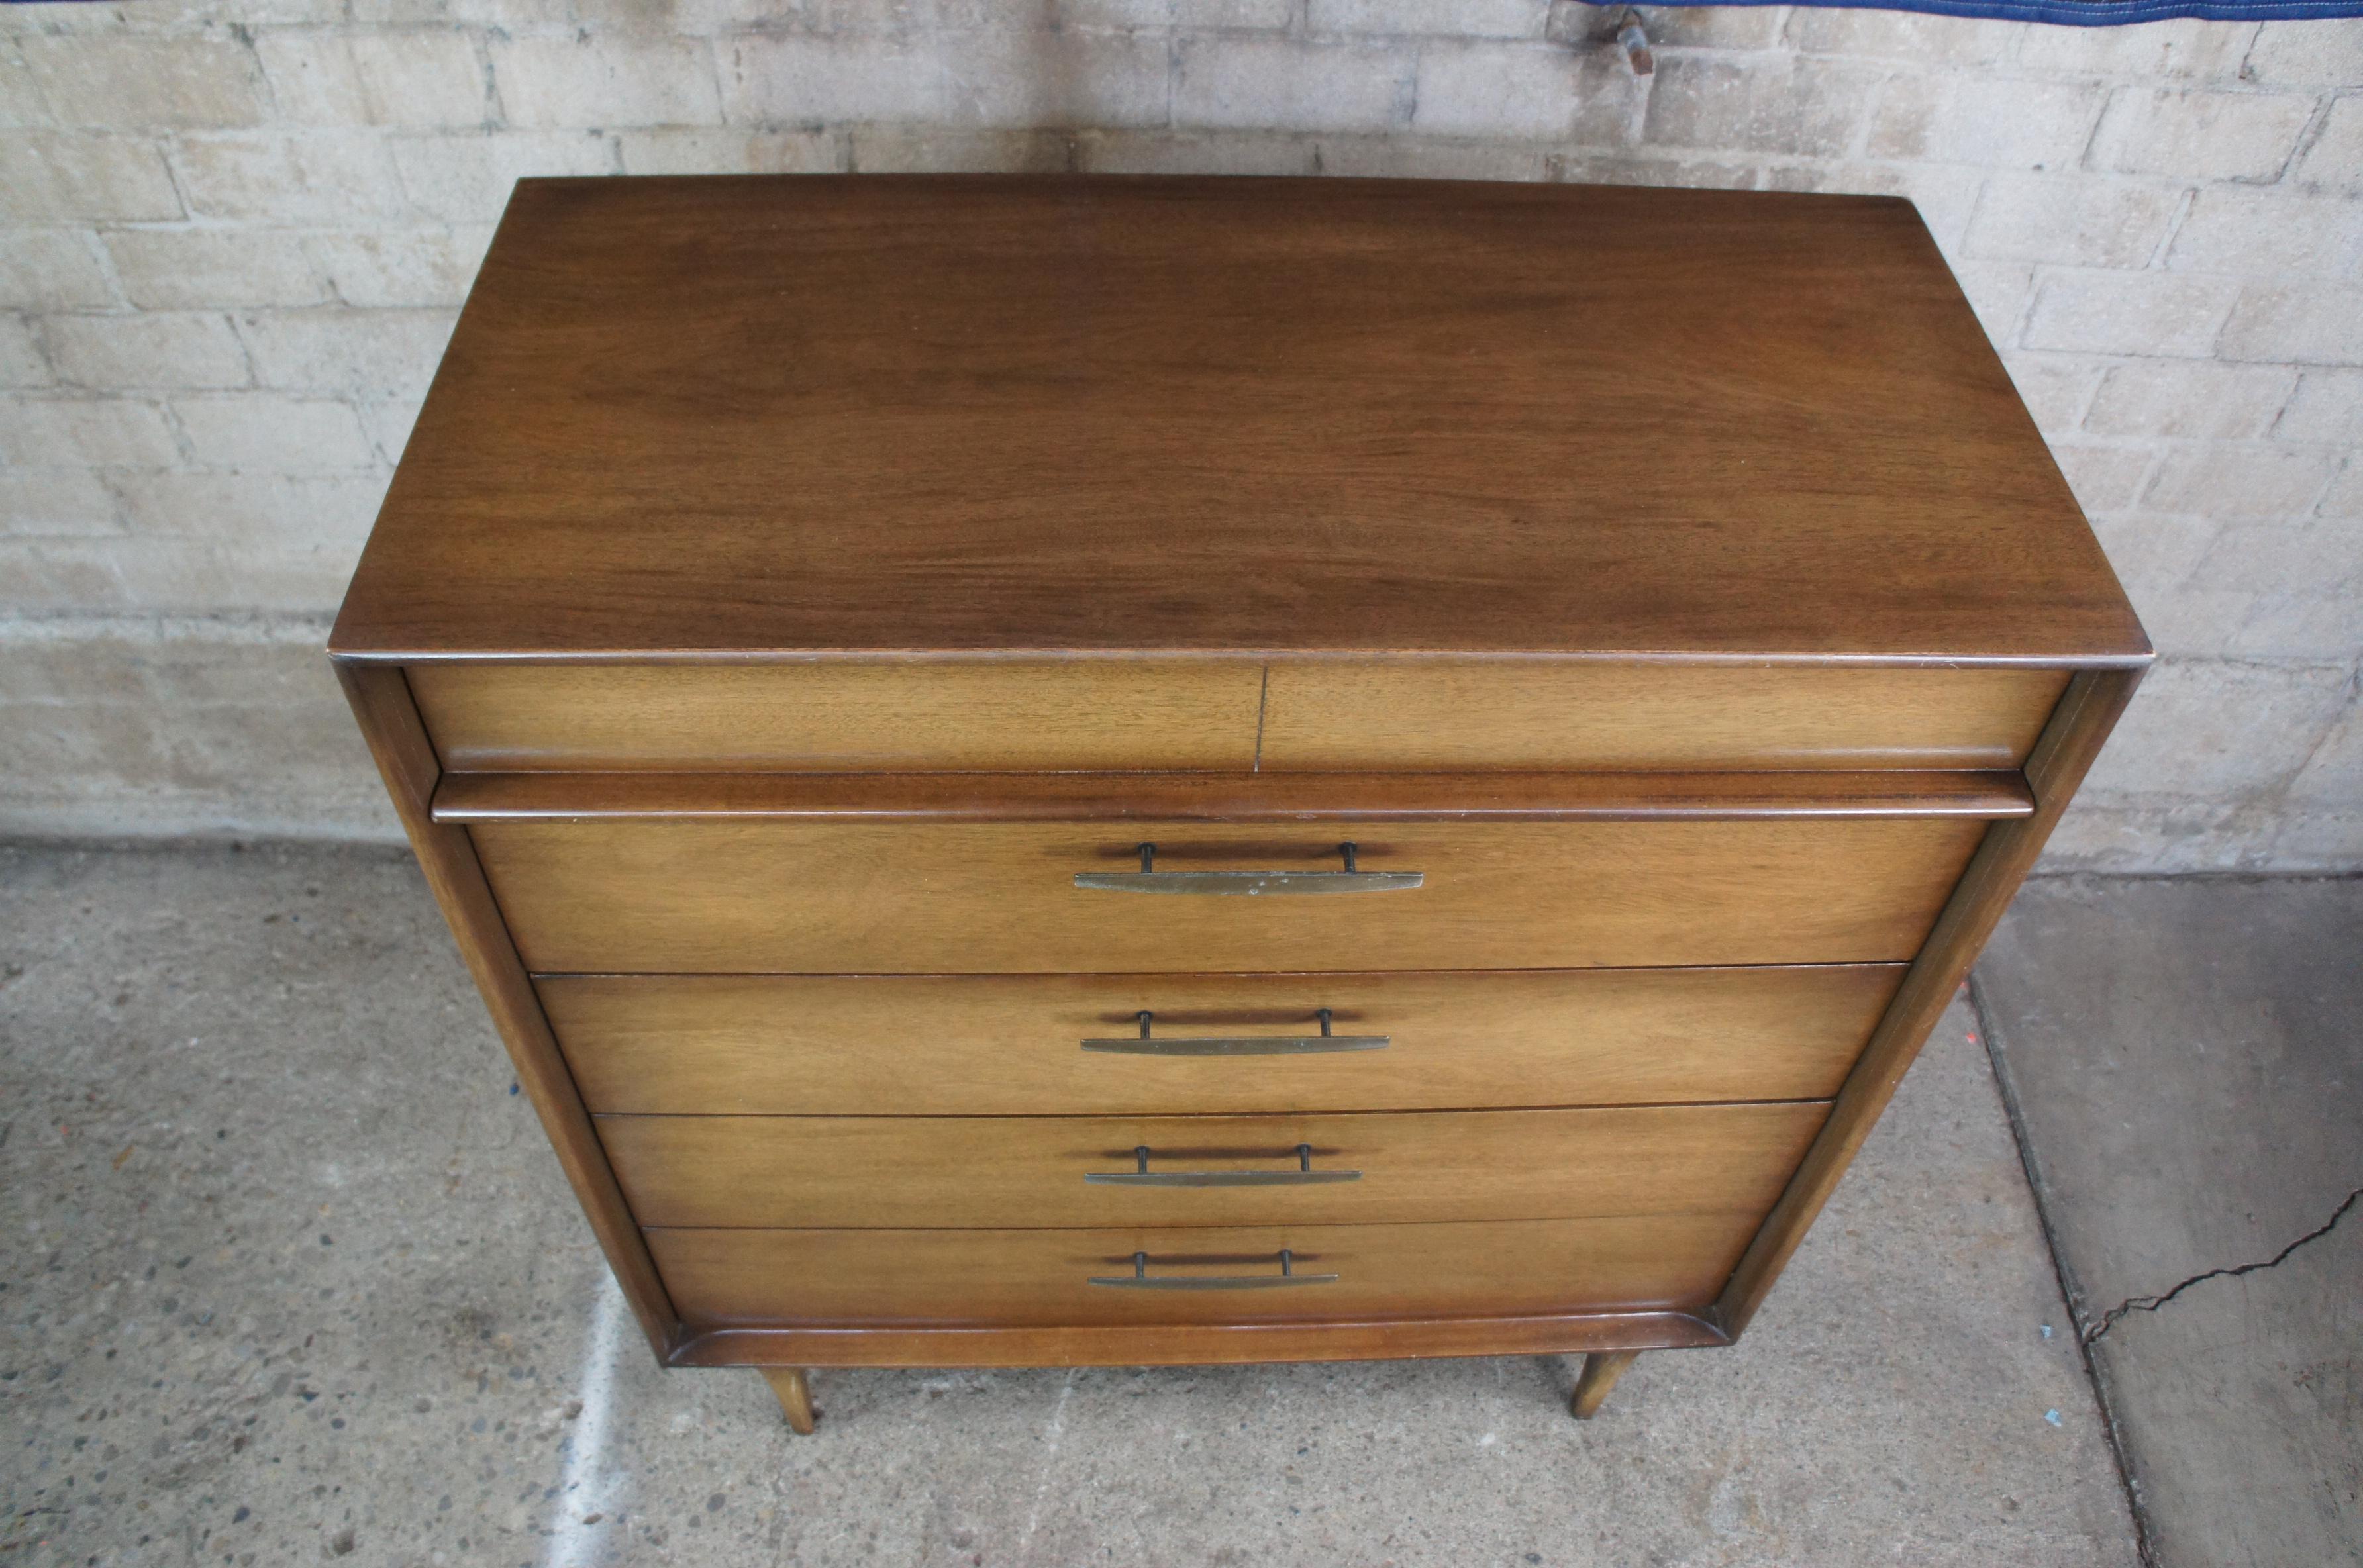 20th Century Mid-Century Modern Walnut Red Lion Table Co Tallboy Dresser Chest of Drawers